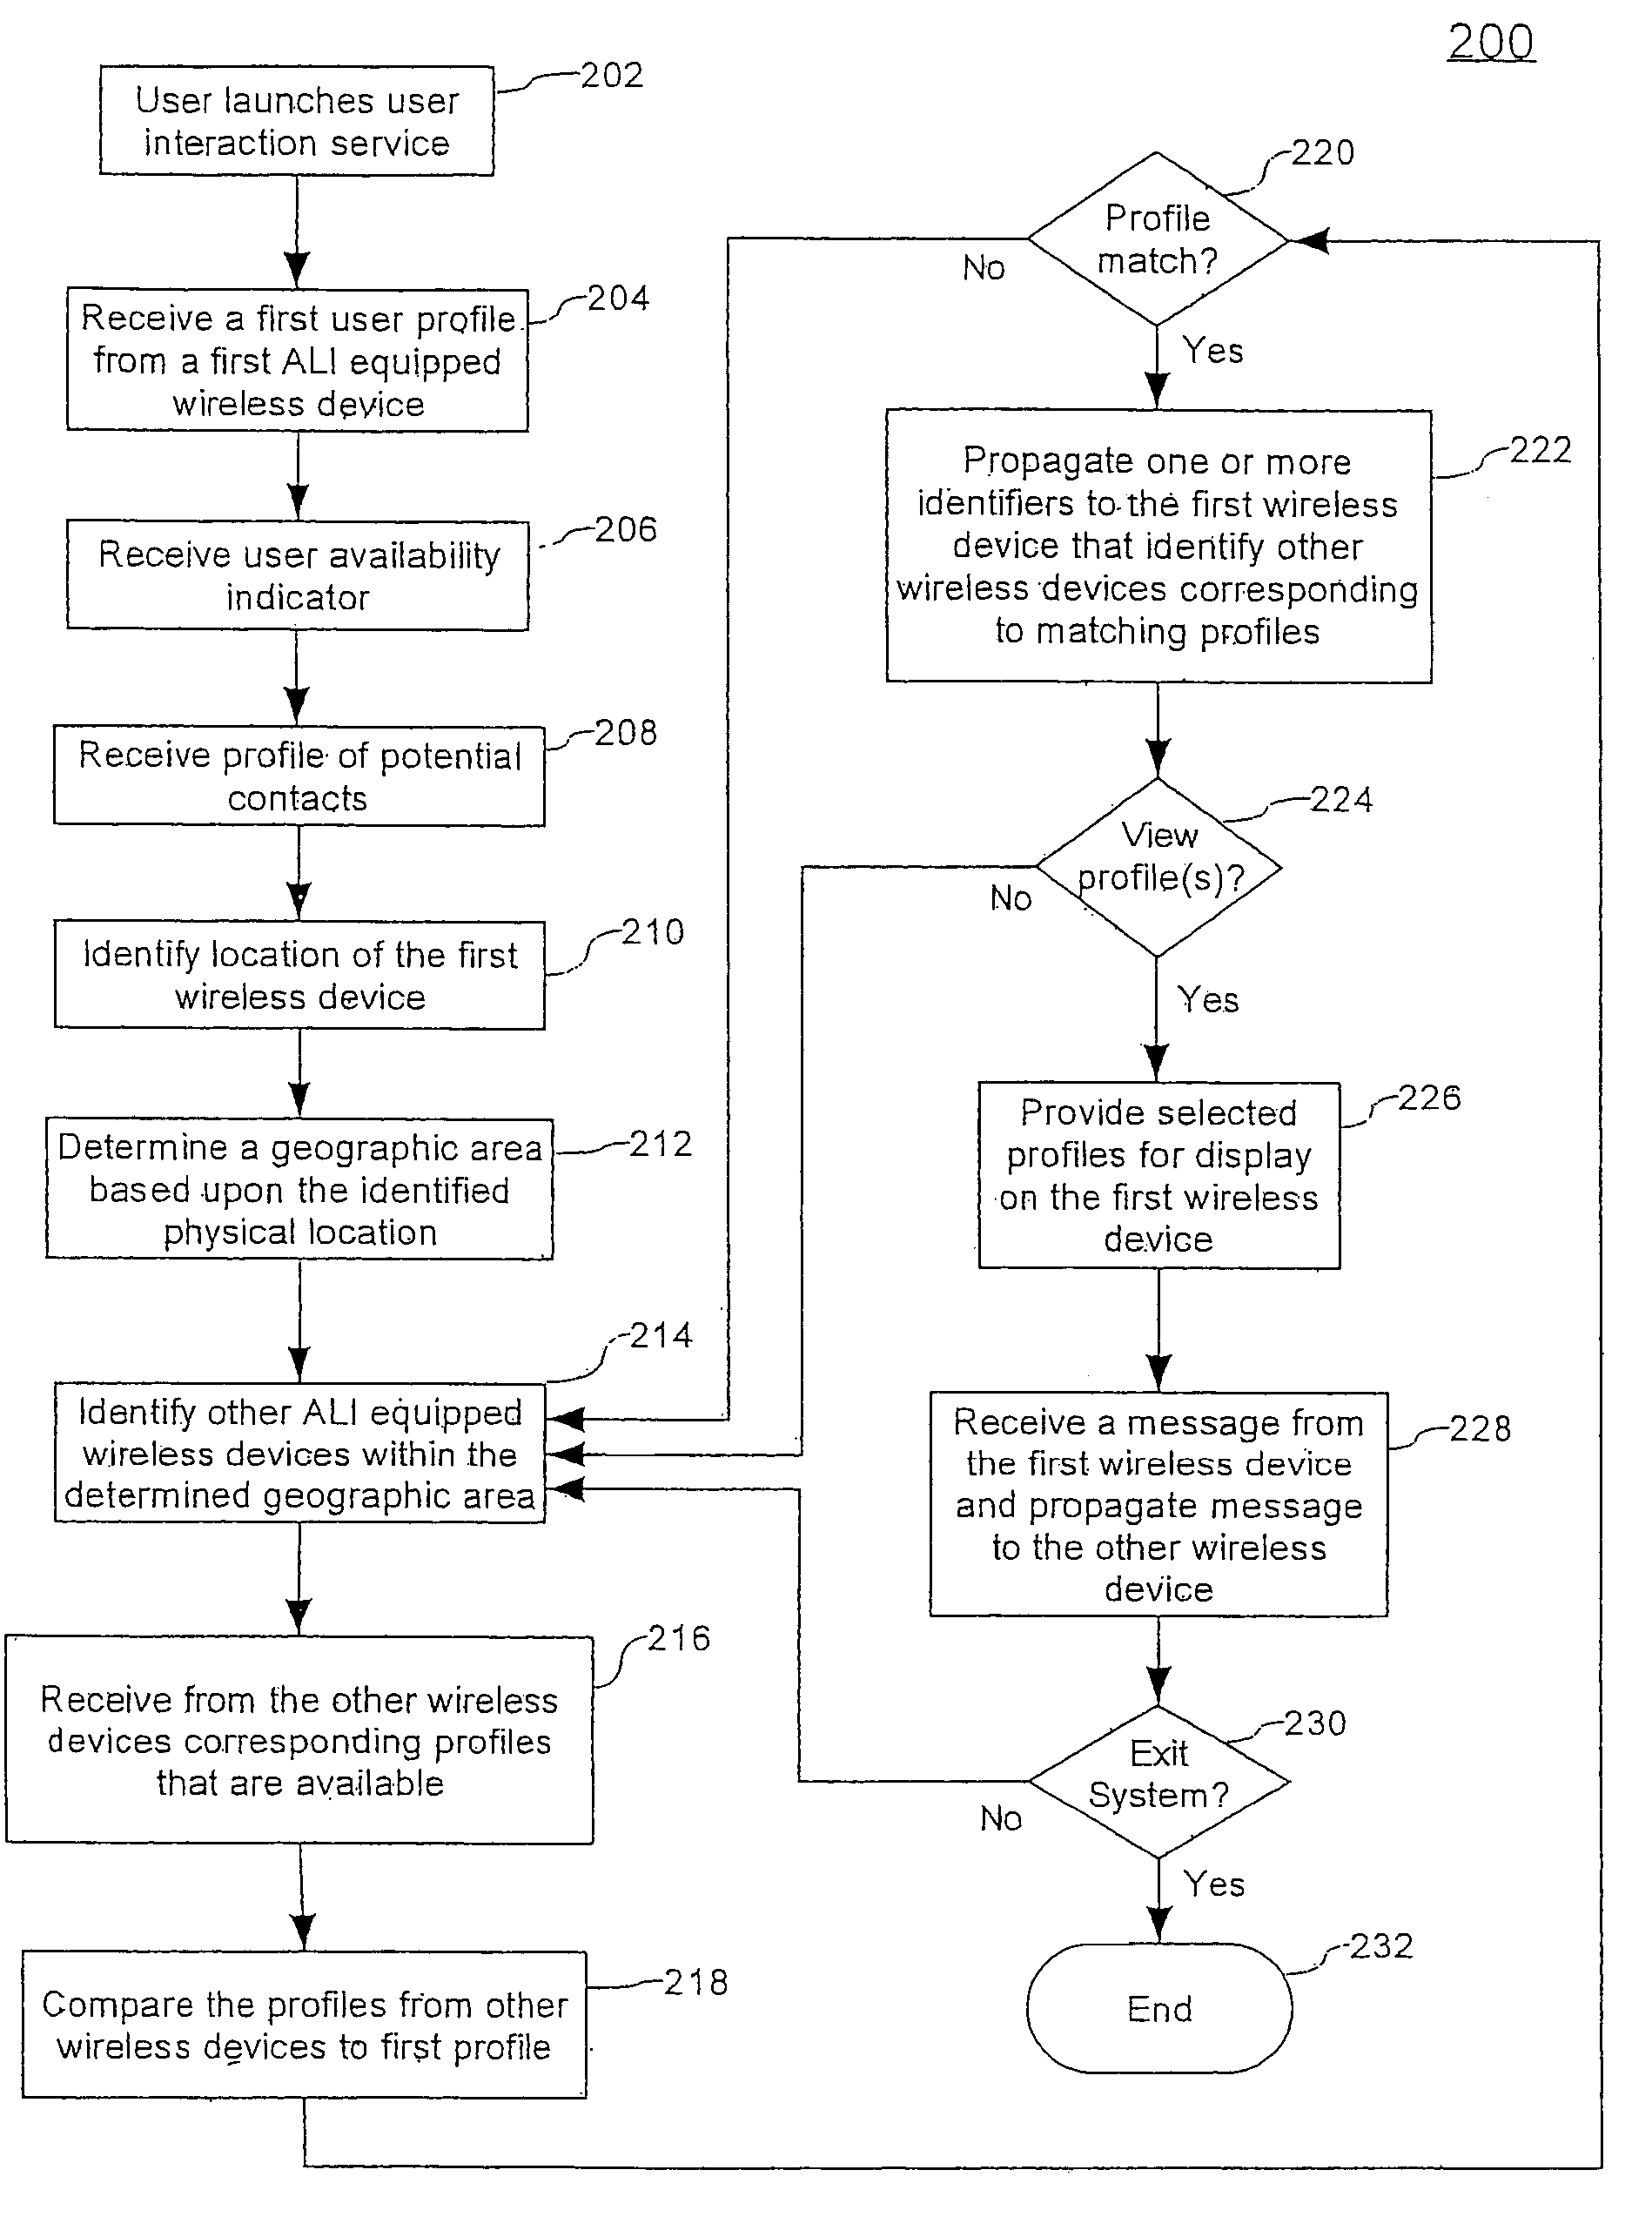 System and method for exchange of geographic location and user profiles over a wireless network